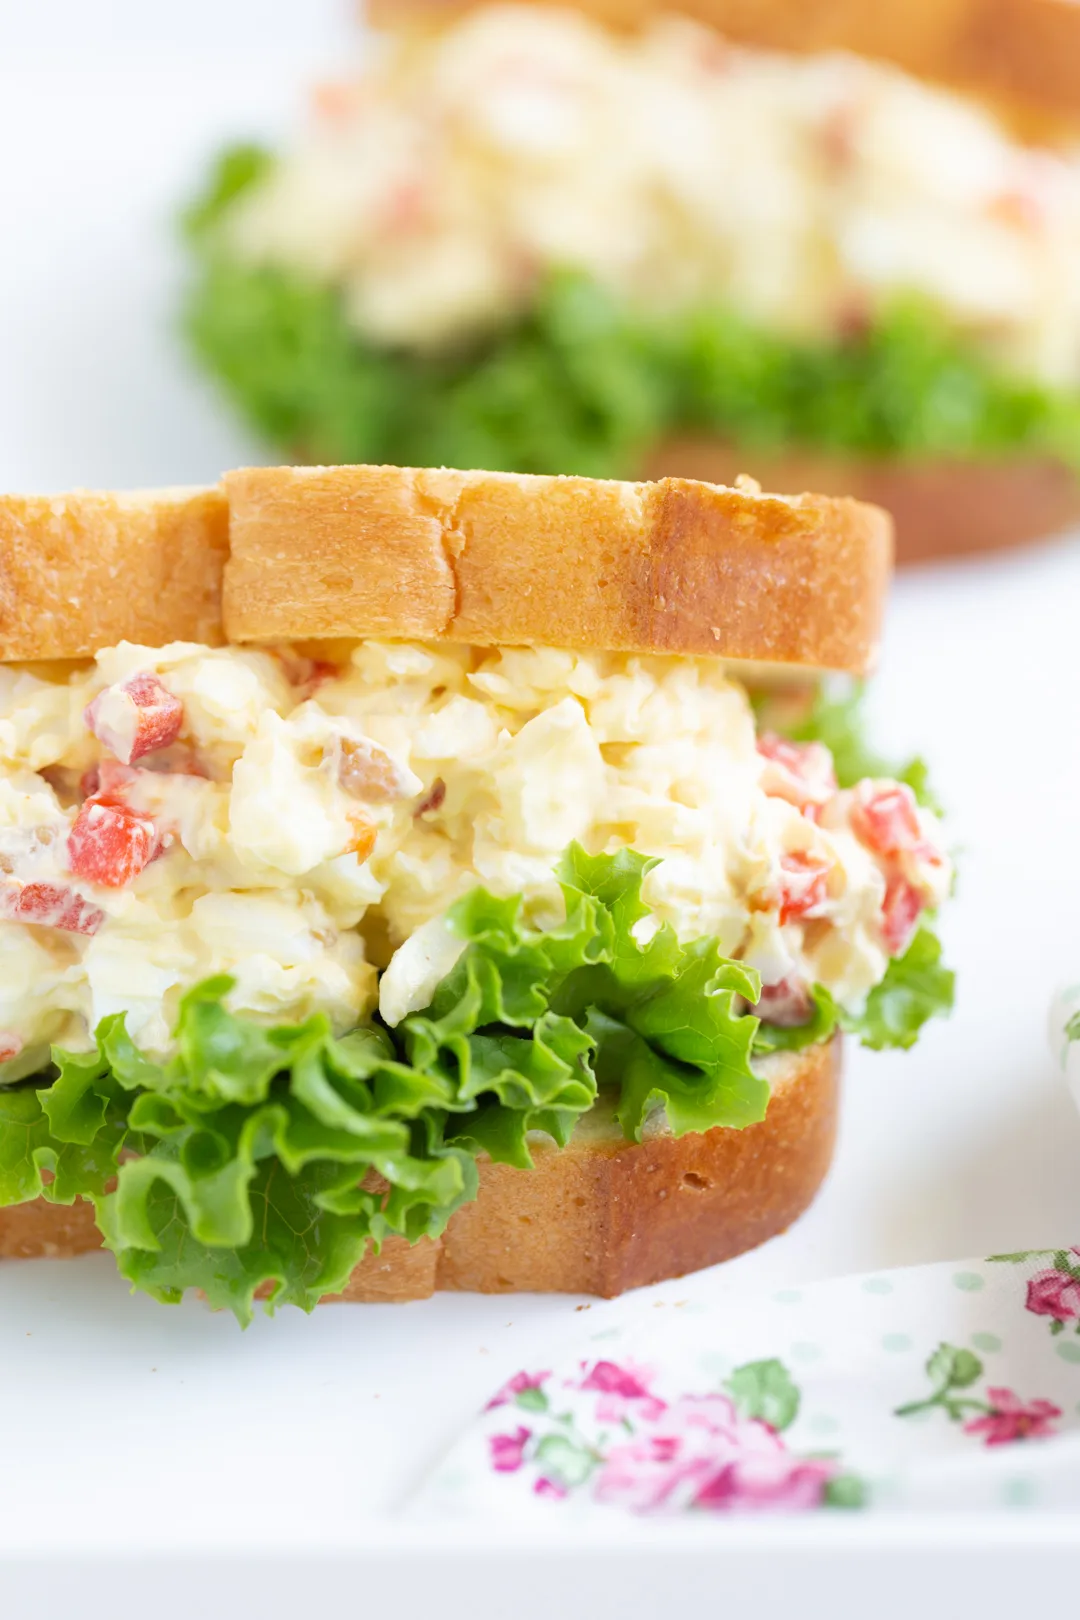 tall stuffed egg salad sandwich with pimientos on a bed of lettuce and white sliced bread